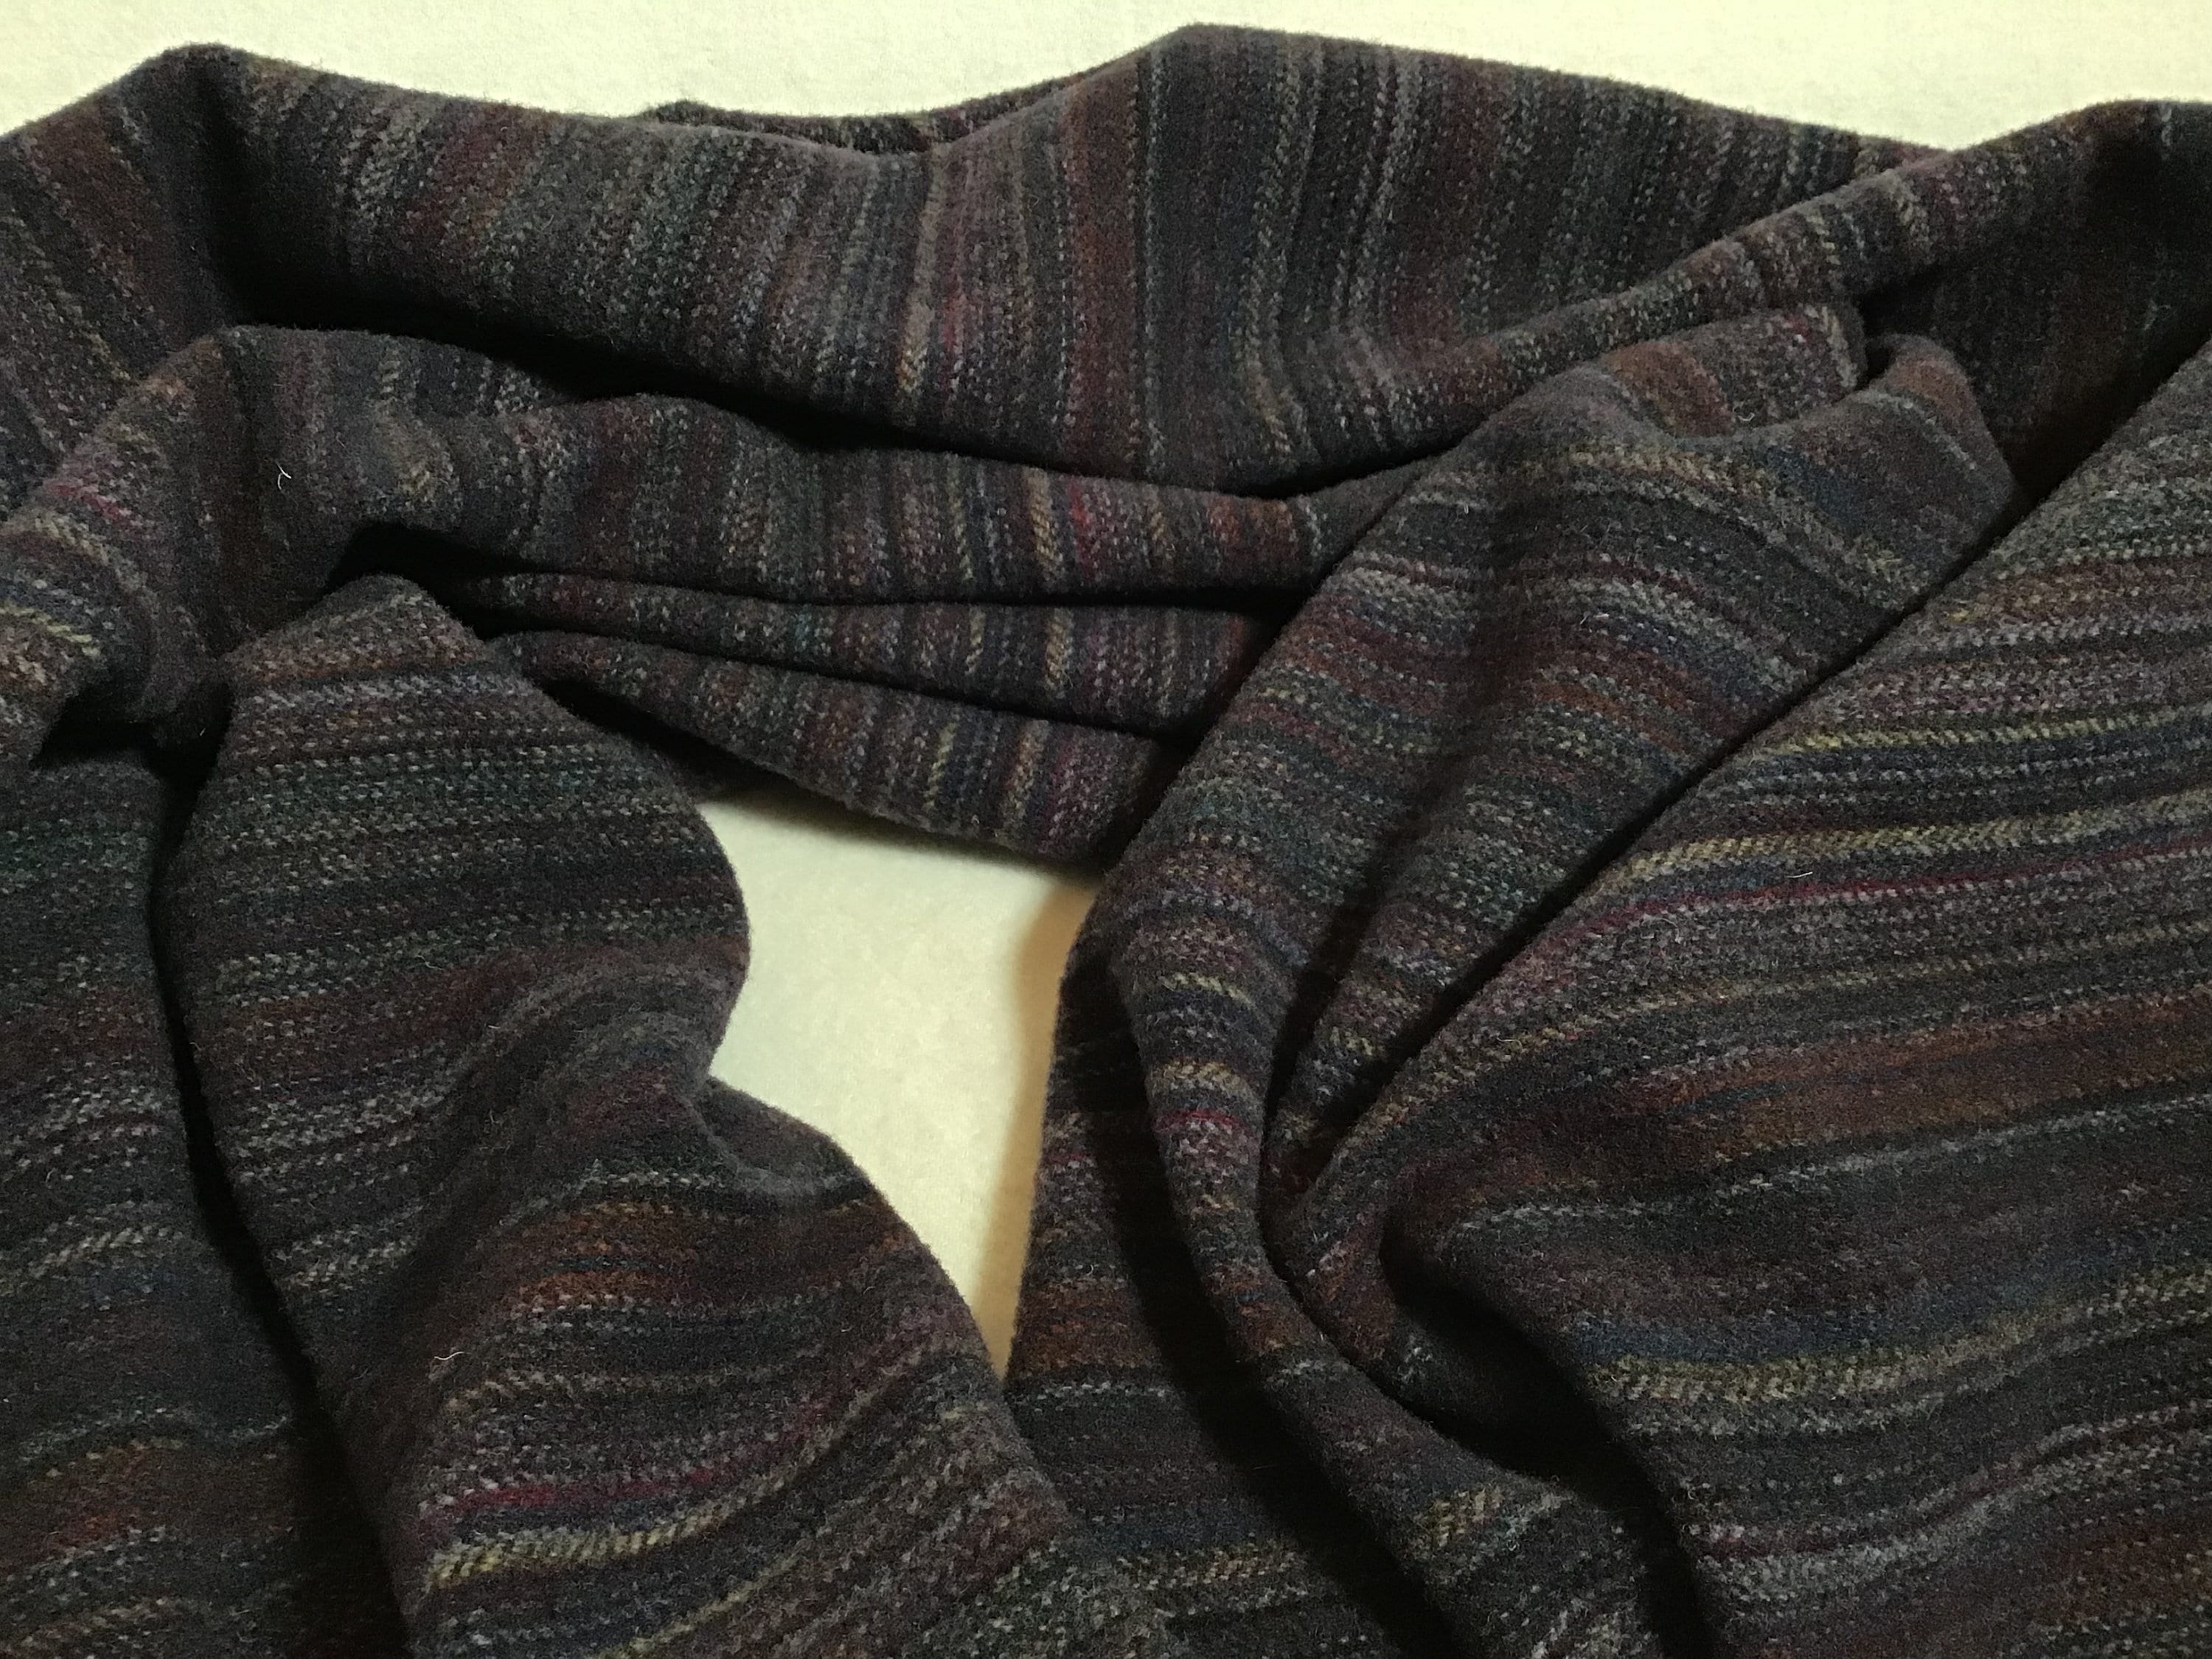 Mixed Stripe, a Cranberry, Blue and Purple Stripe Mill-Dyed Wool